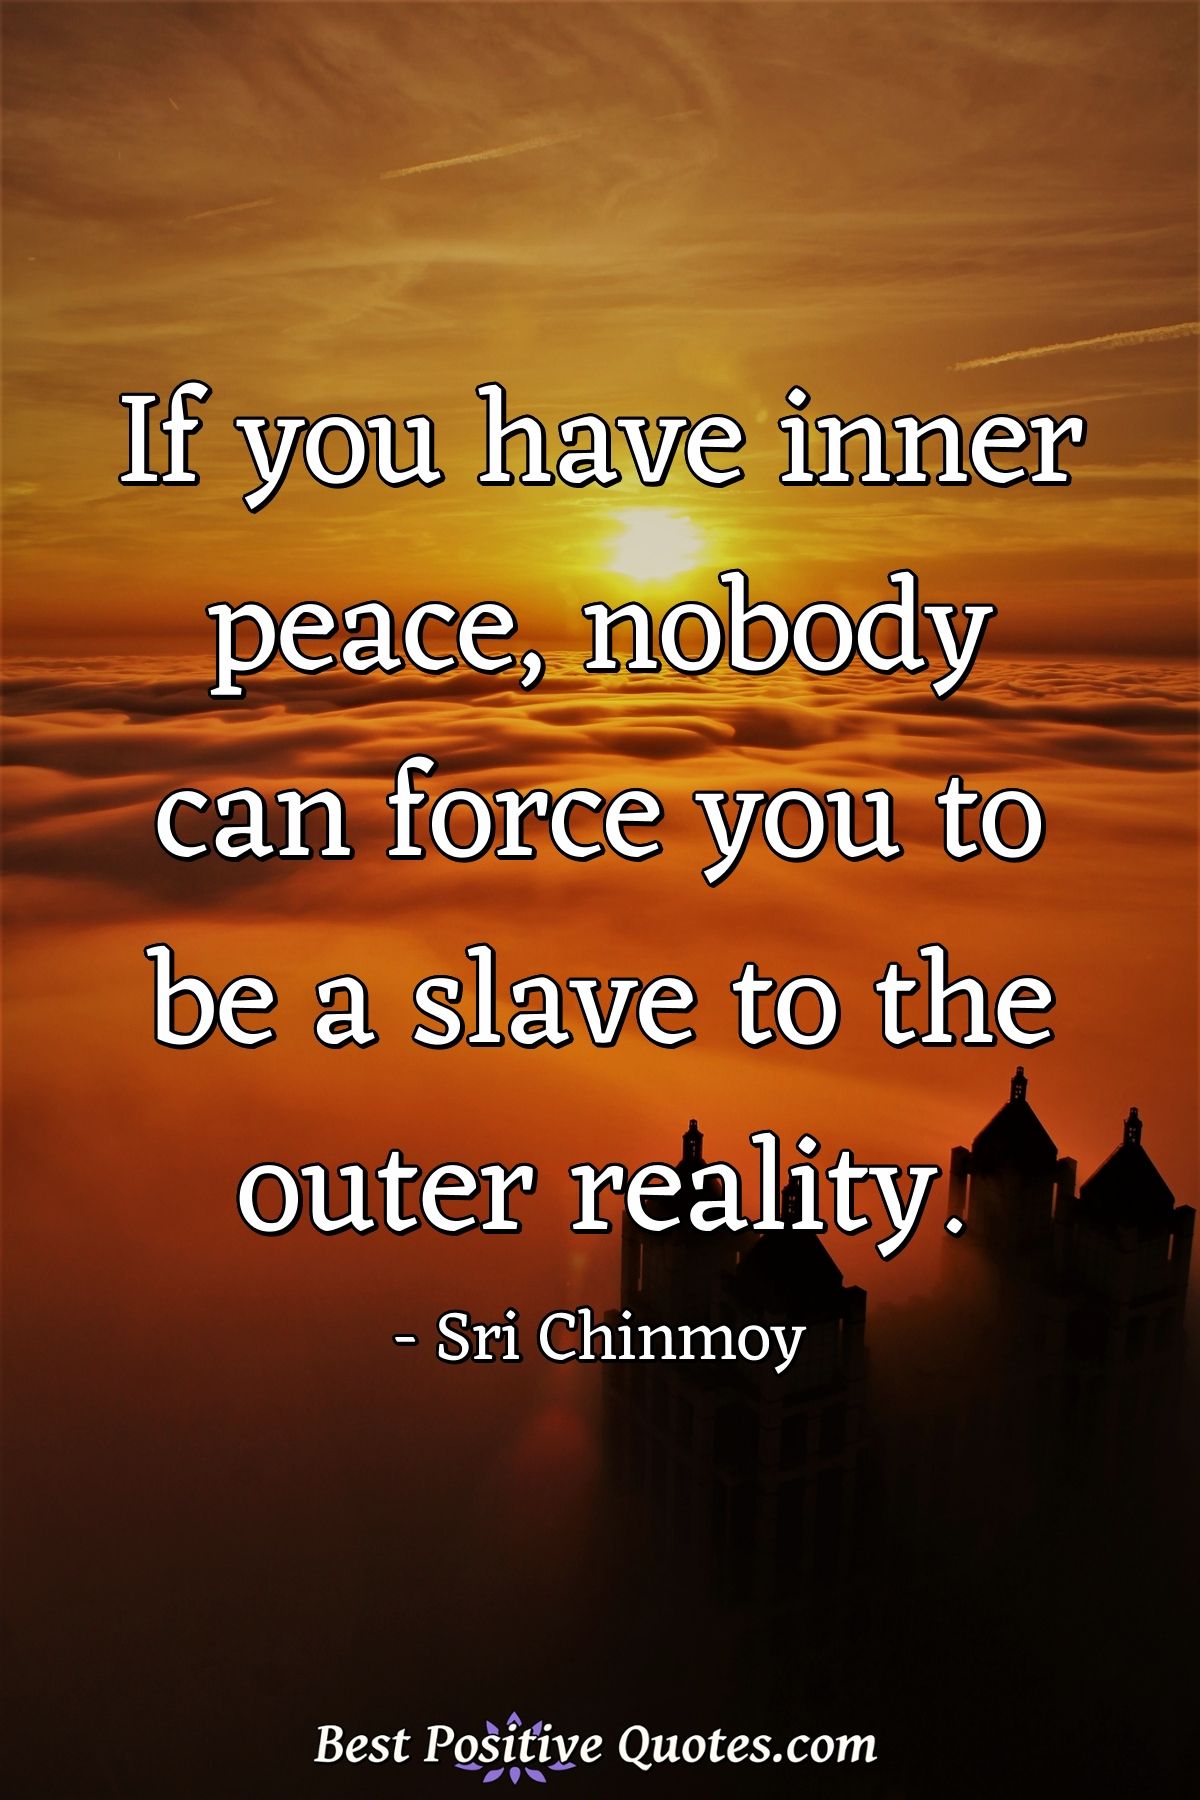 If you have inner peace, nobody can force you to be a slave to the outer reality. - Sri Chinmoy